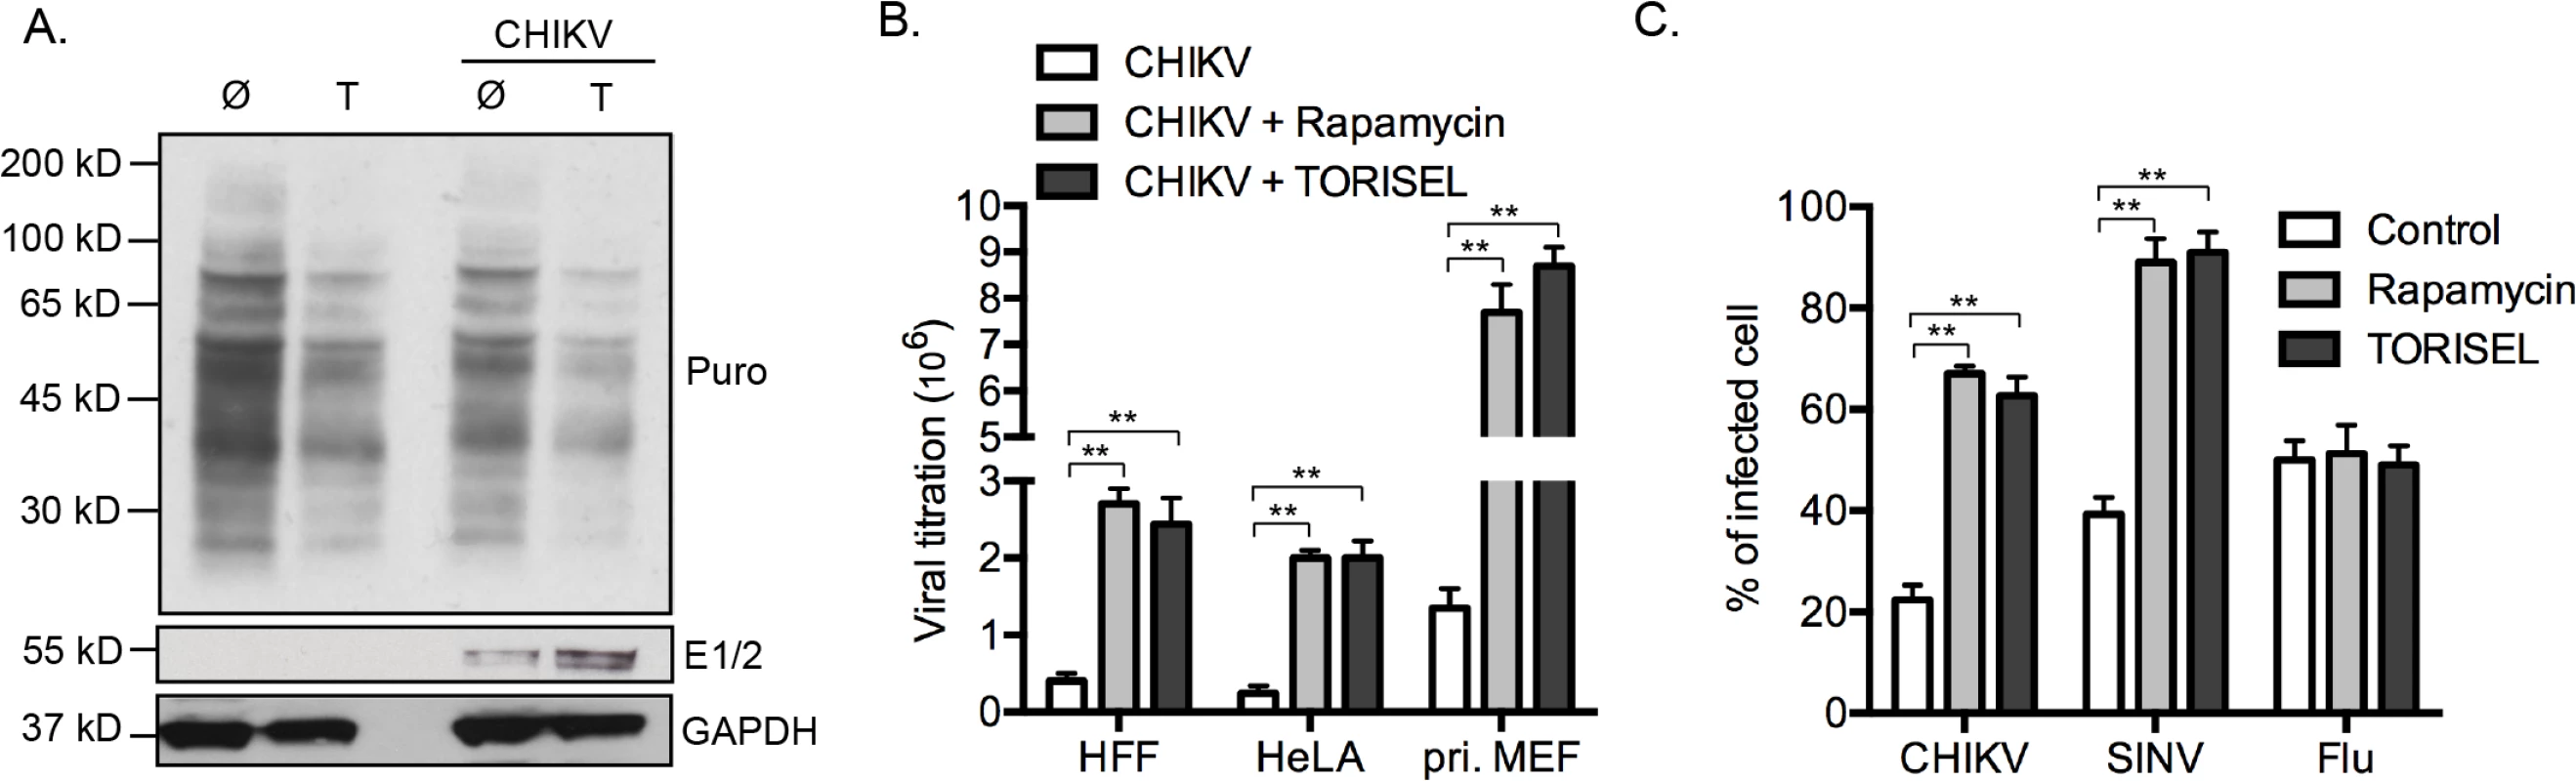 Enhanced protein translation during mTORC1 inhibition is specific for viral proteins.